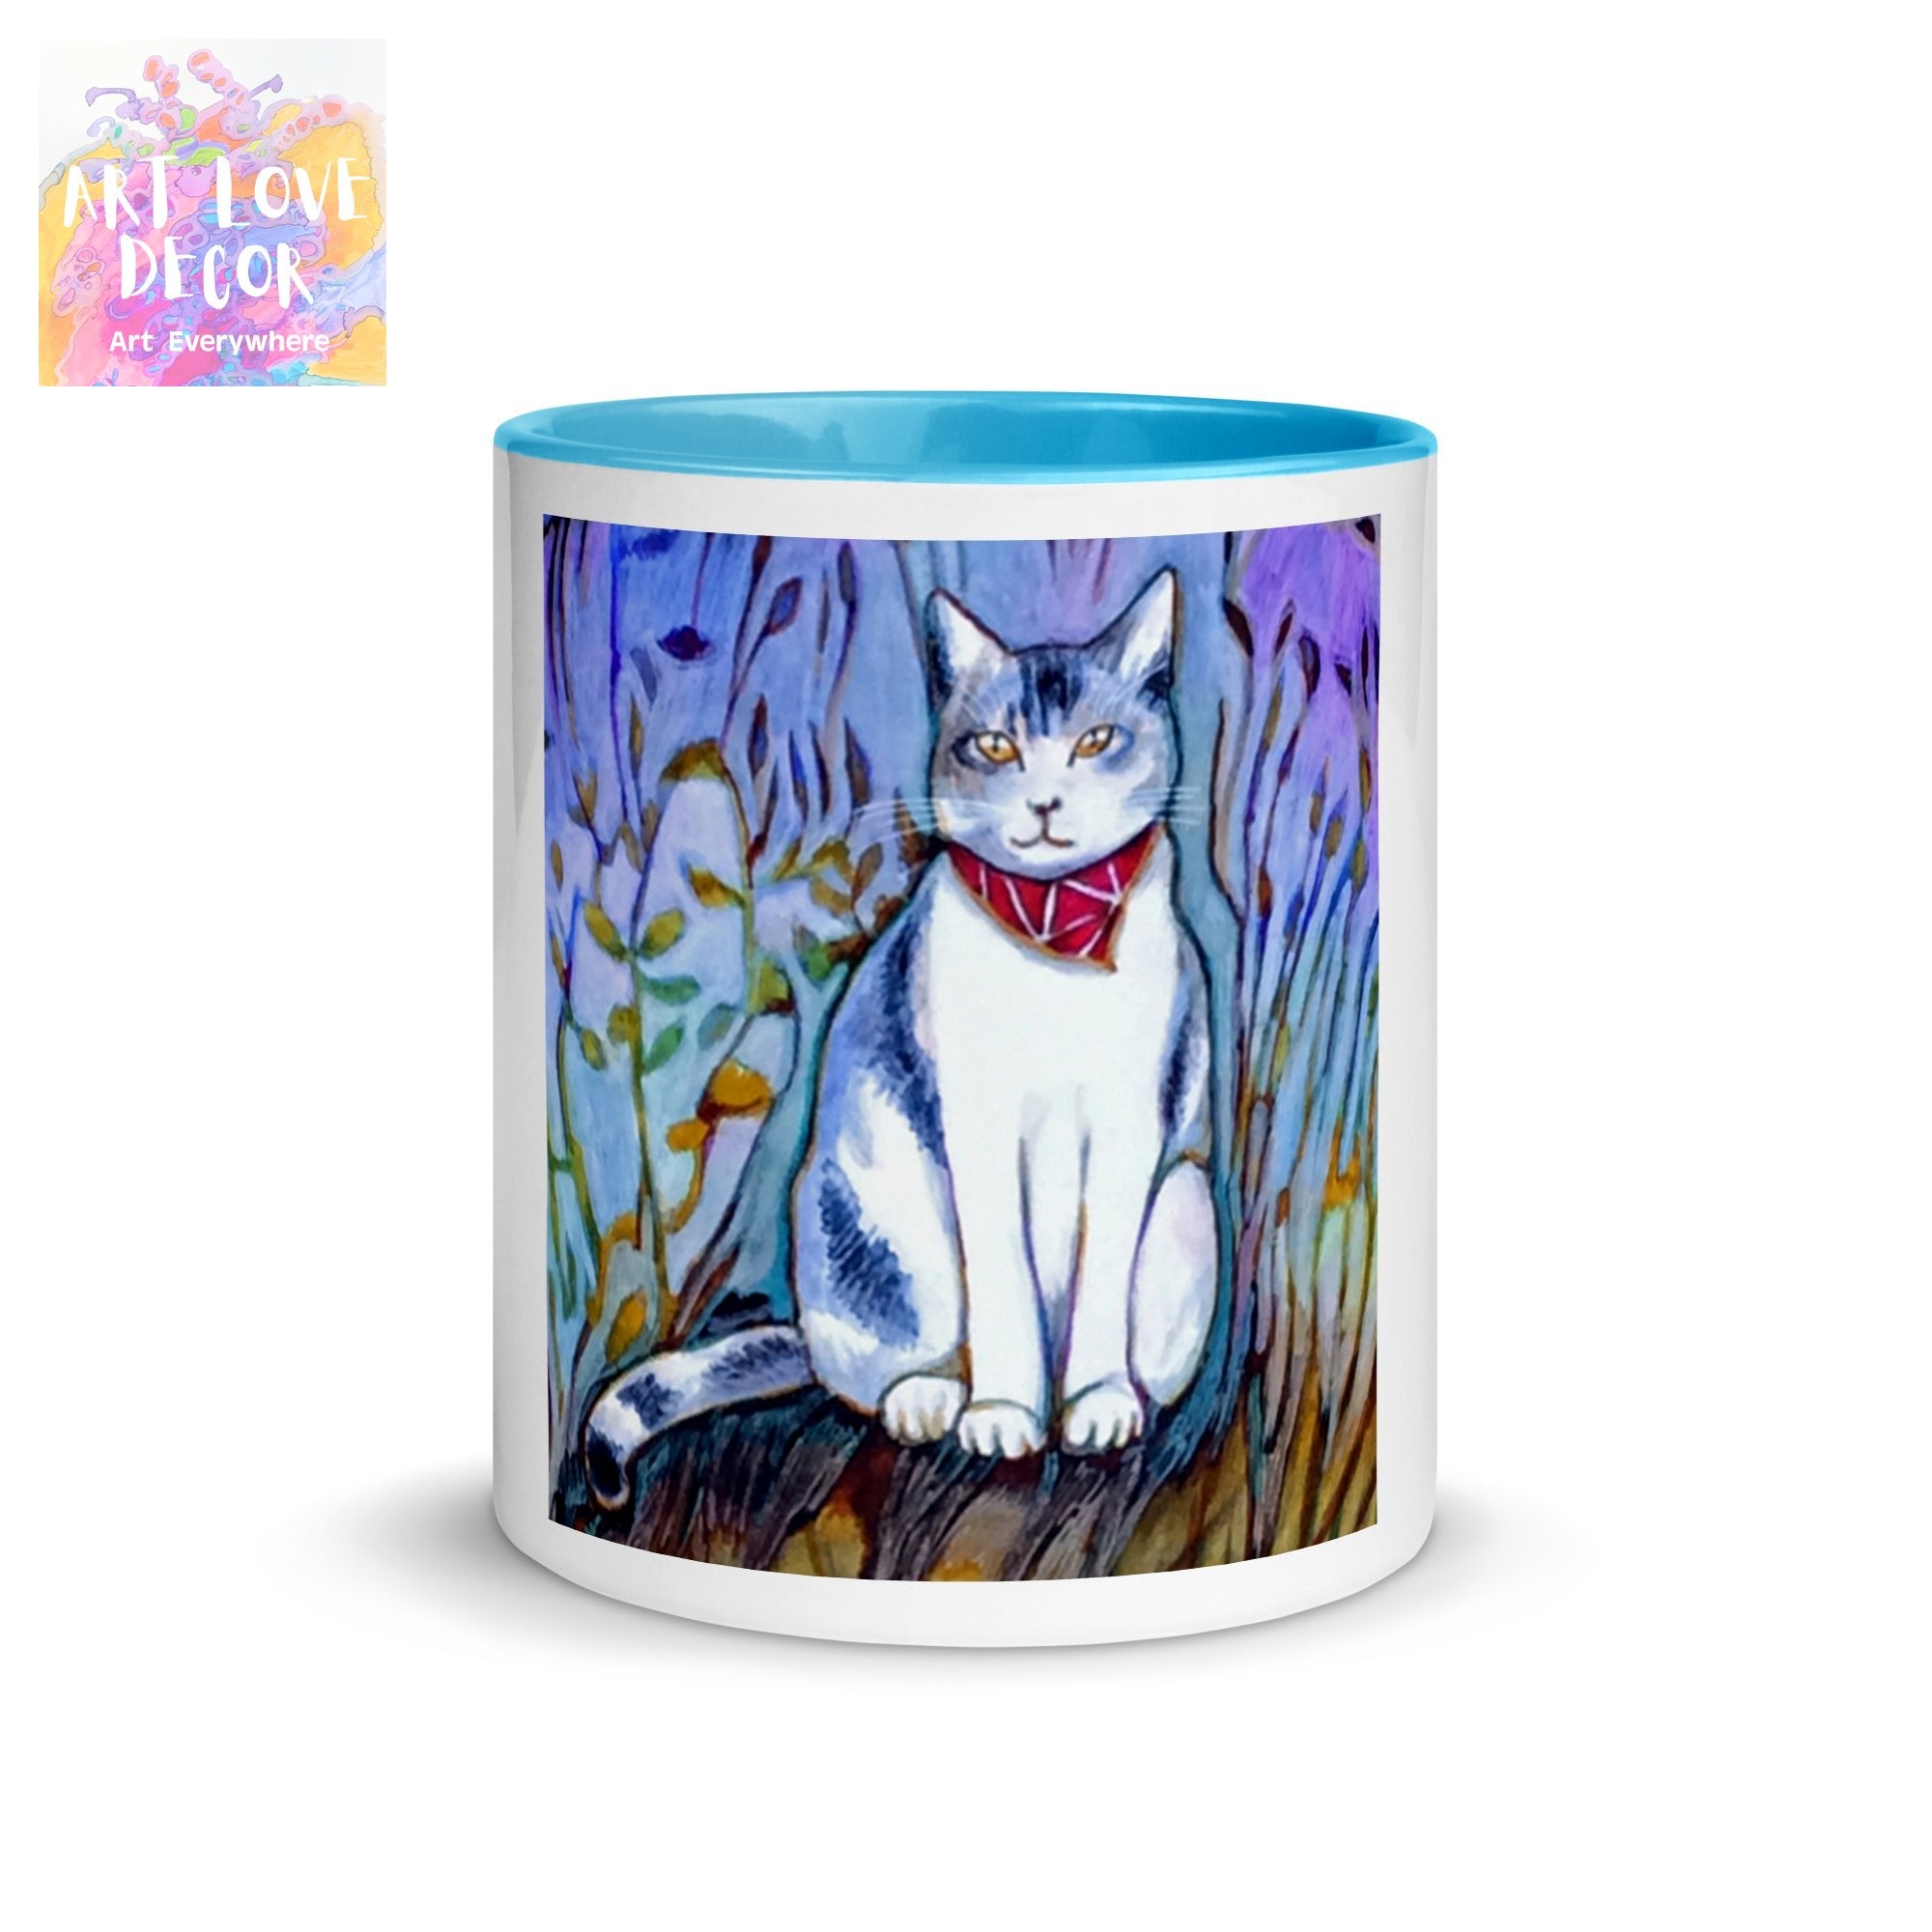 Cat in Scarf Mug with Color Inside - Art Love Decor